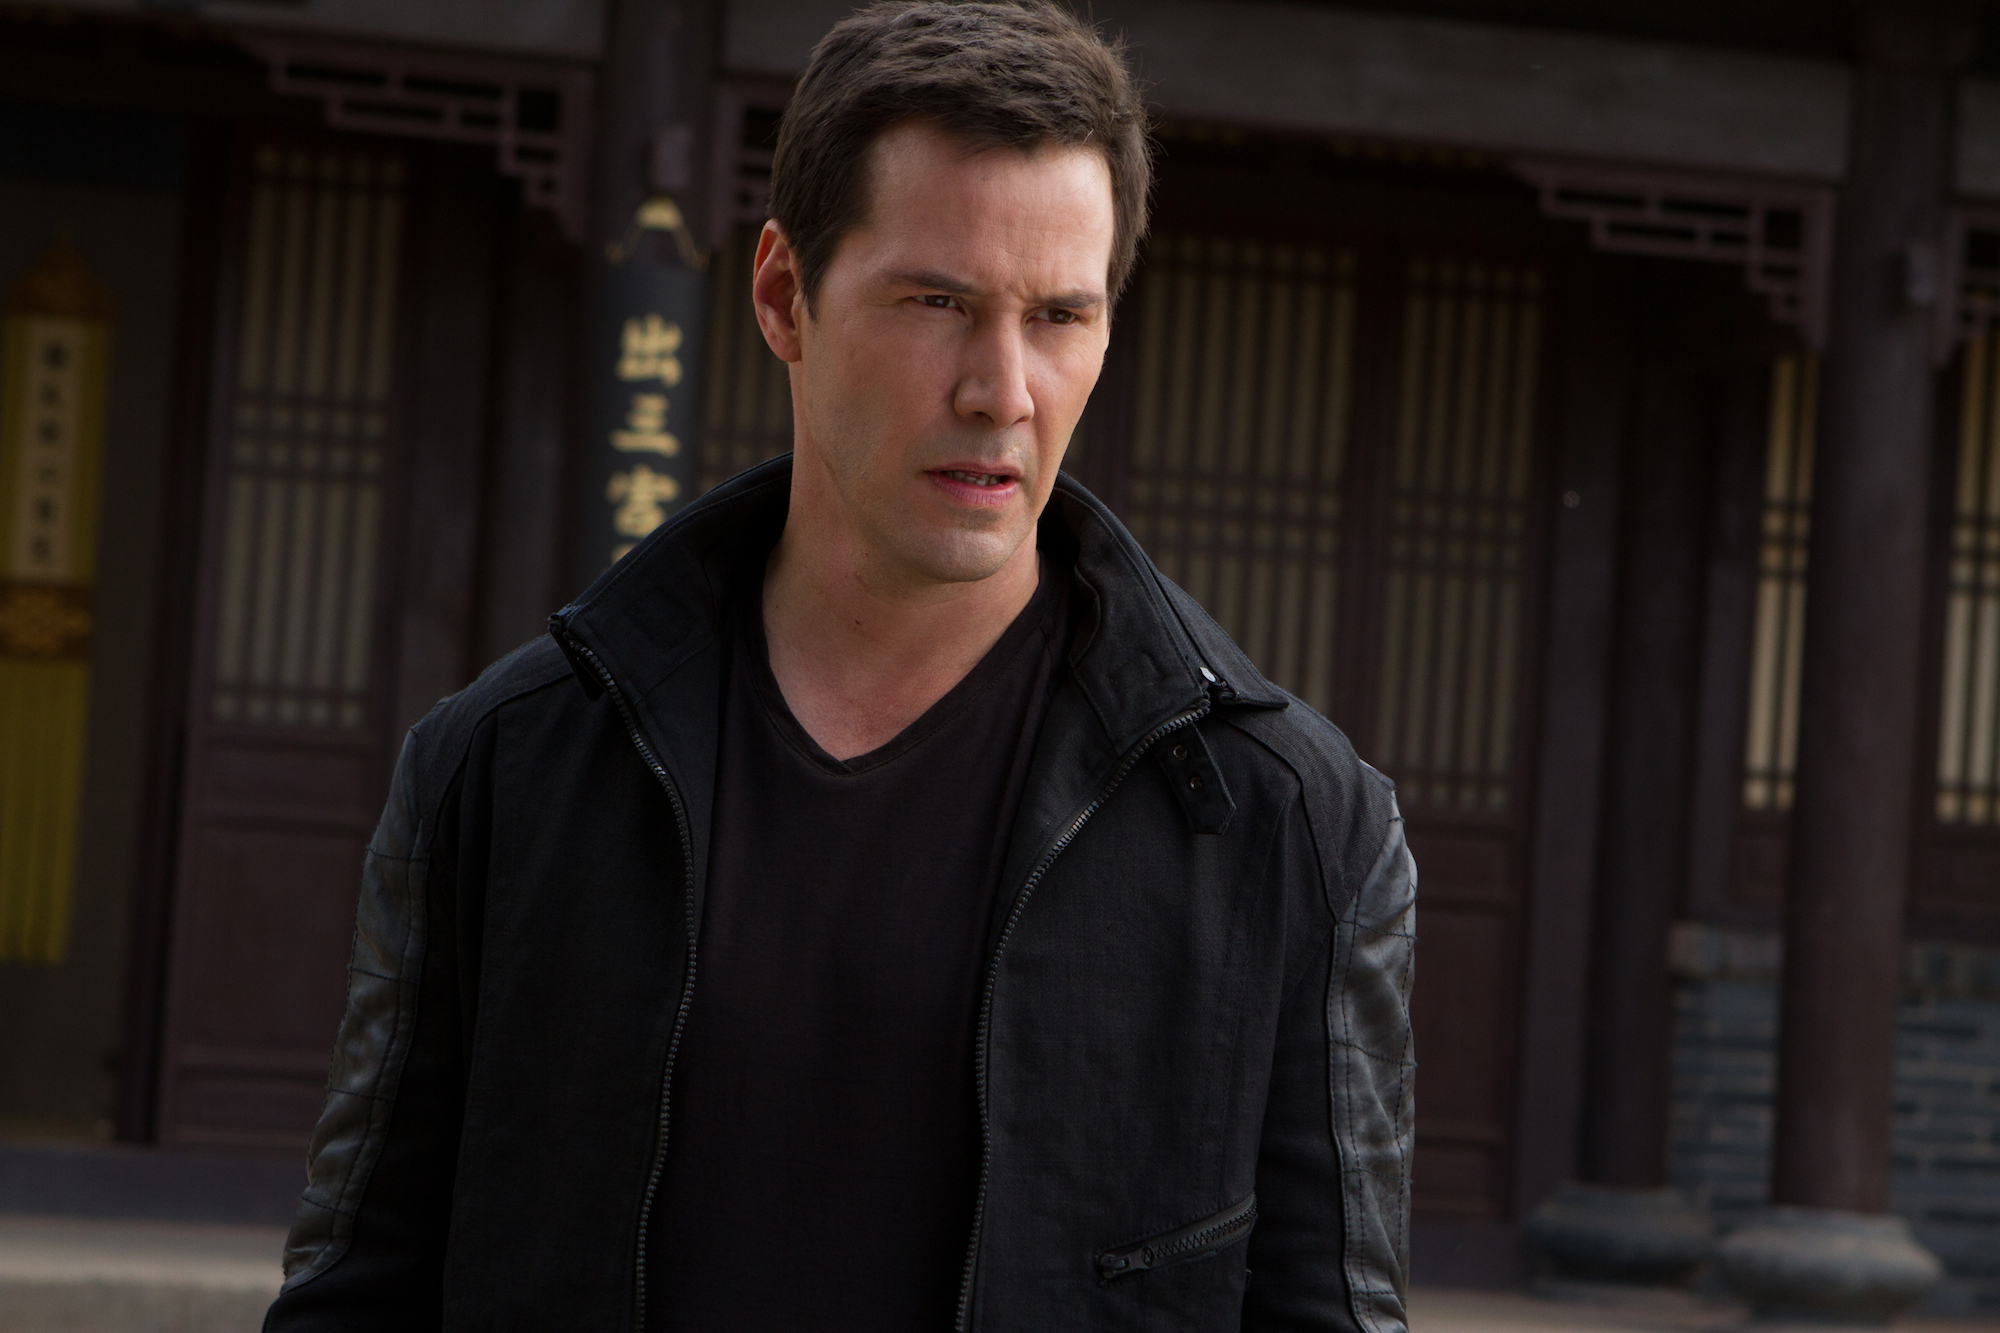 Man Of Tai Chi Backgrounds, Compatible - PC, Mobile, Gadgets| 2000x1333 px